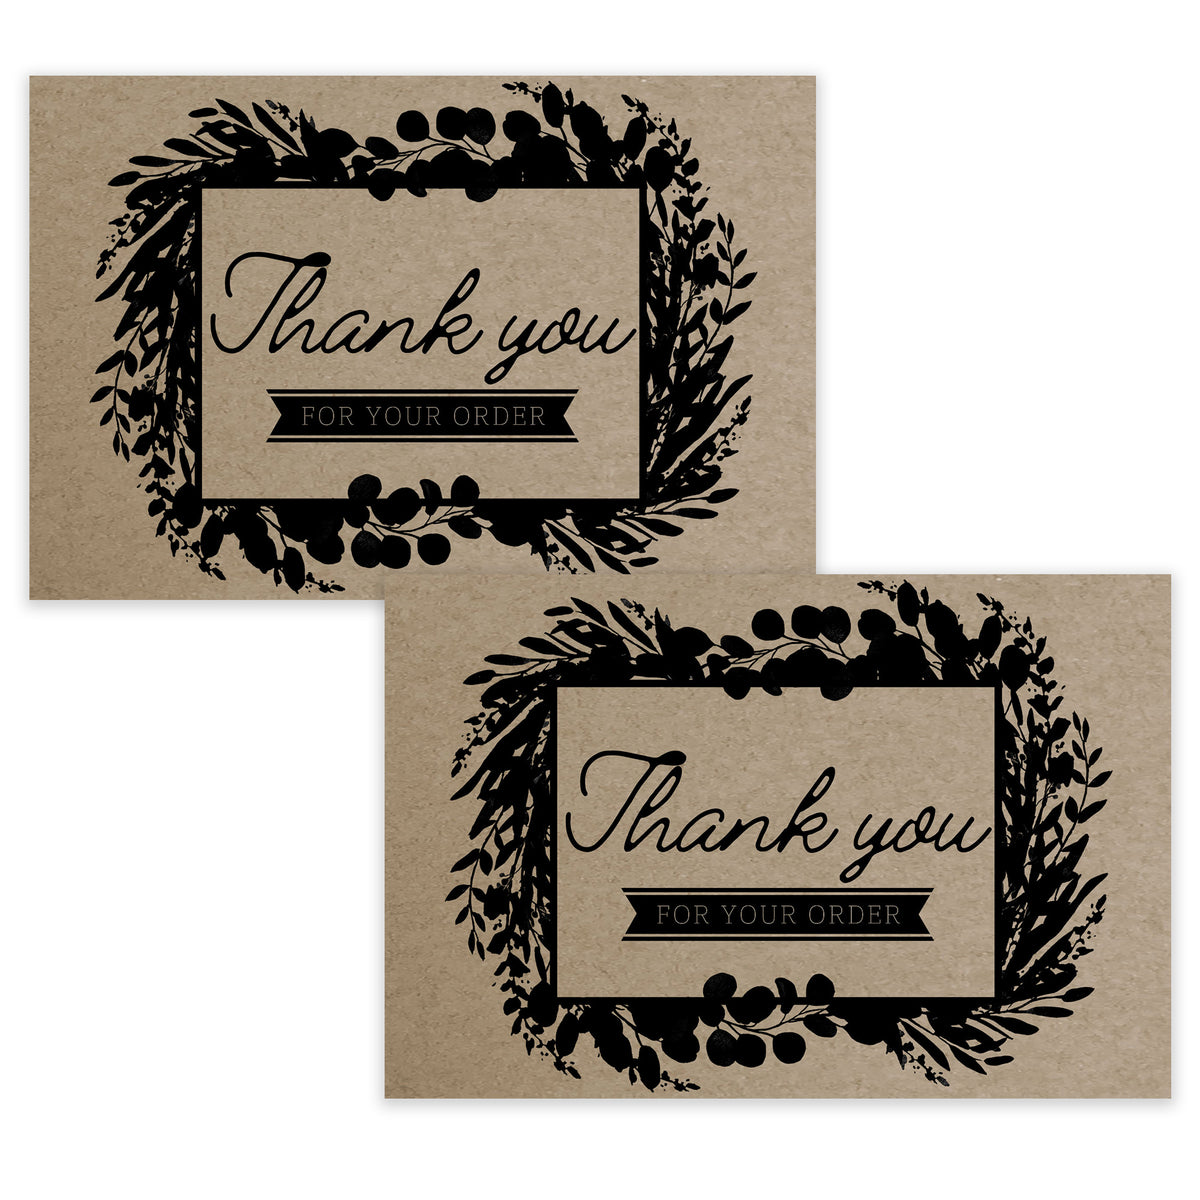 Pre-Printed KRAFT Thank you Cards on 4x6 Discount Card Stock - 50 pack